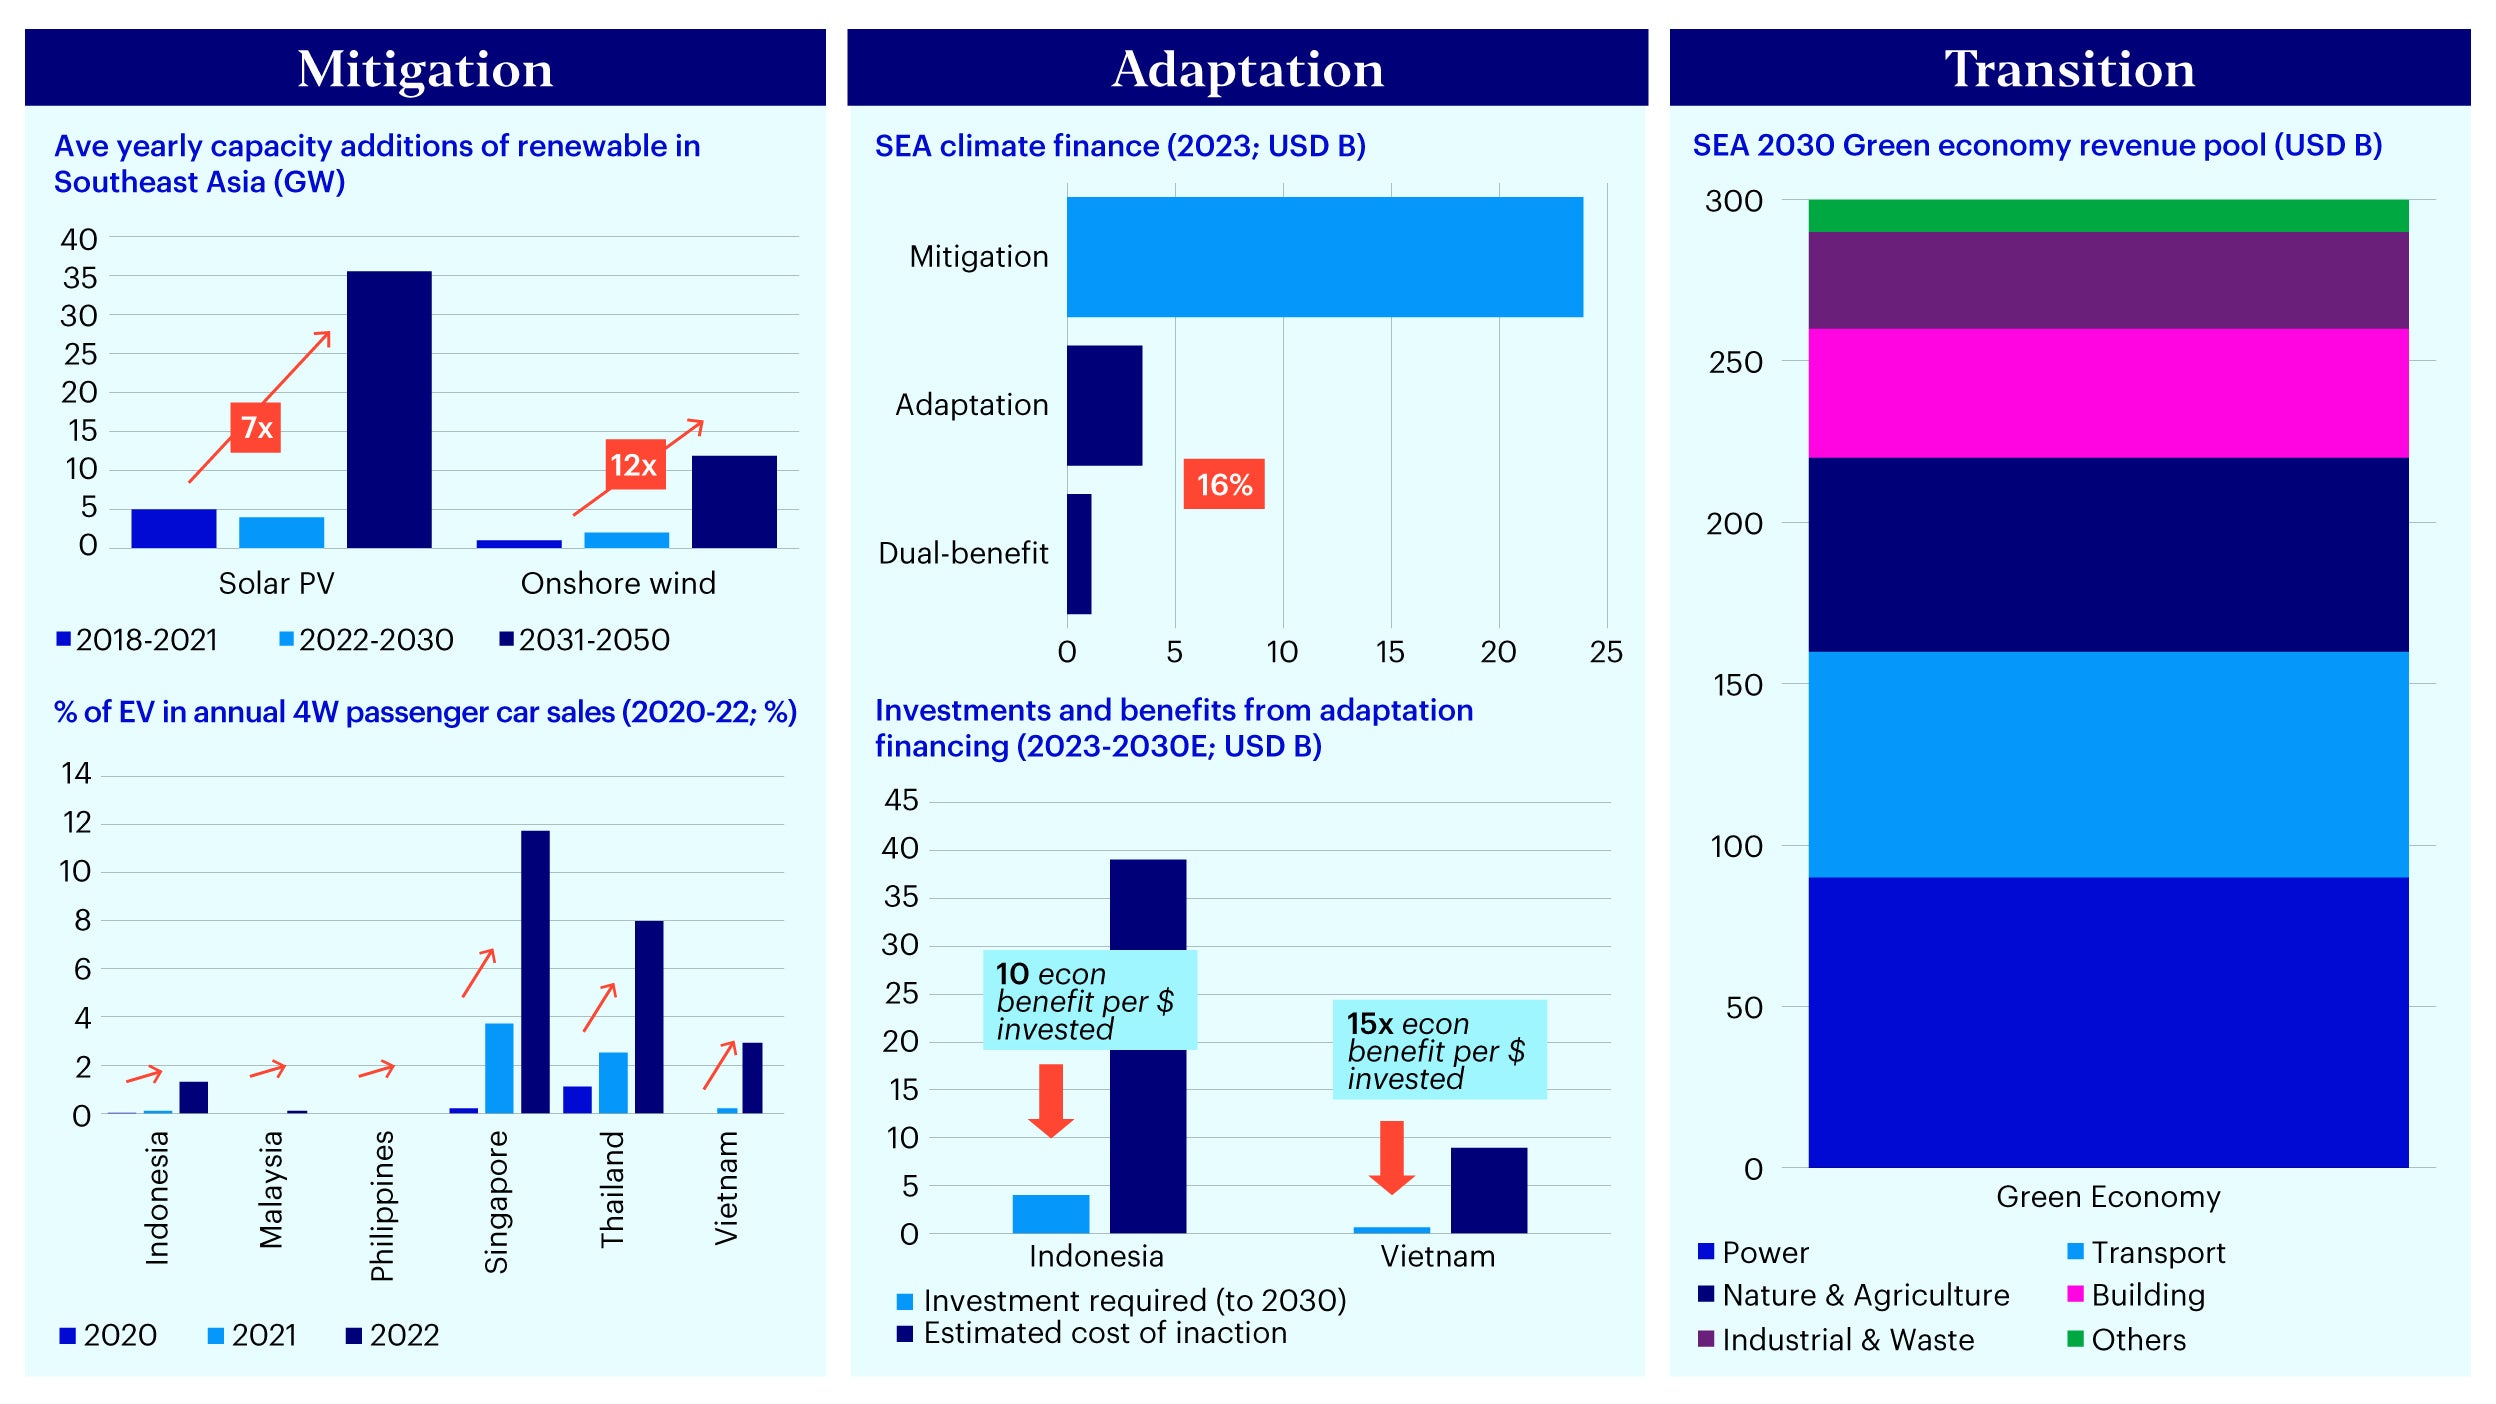 Figure 3 - ASEAN opportunities in mitigation, adaptation, transition